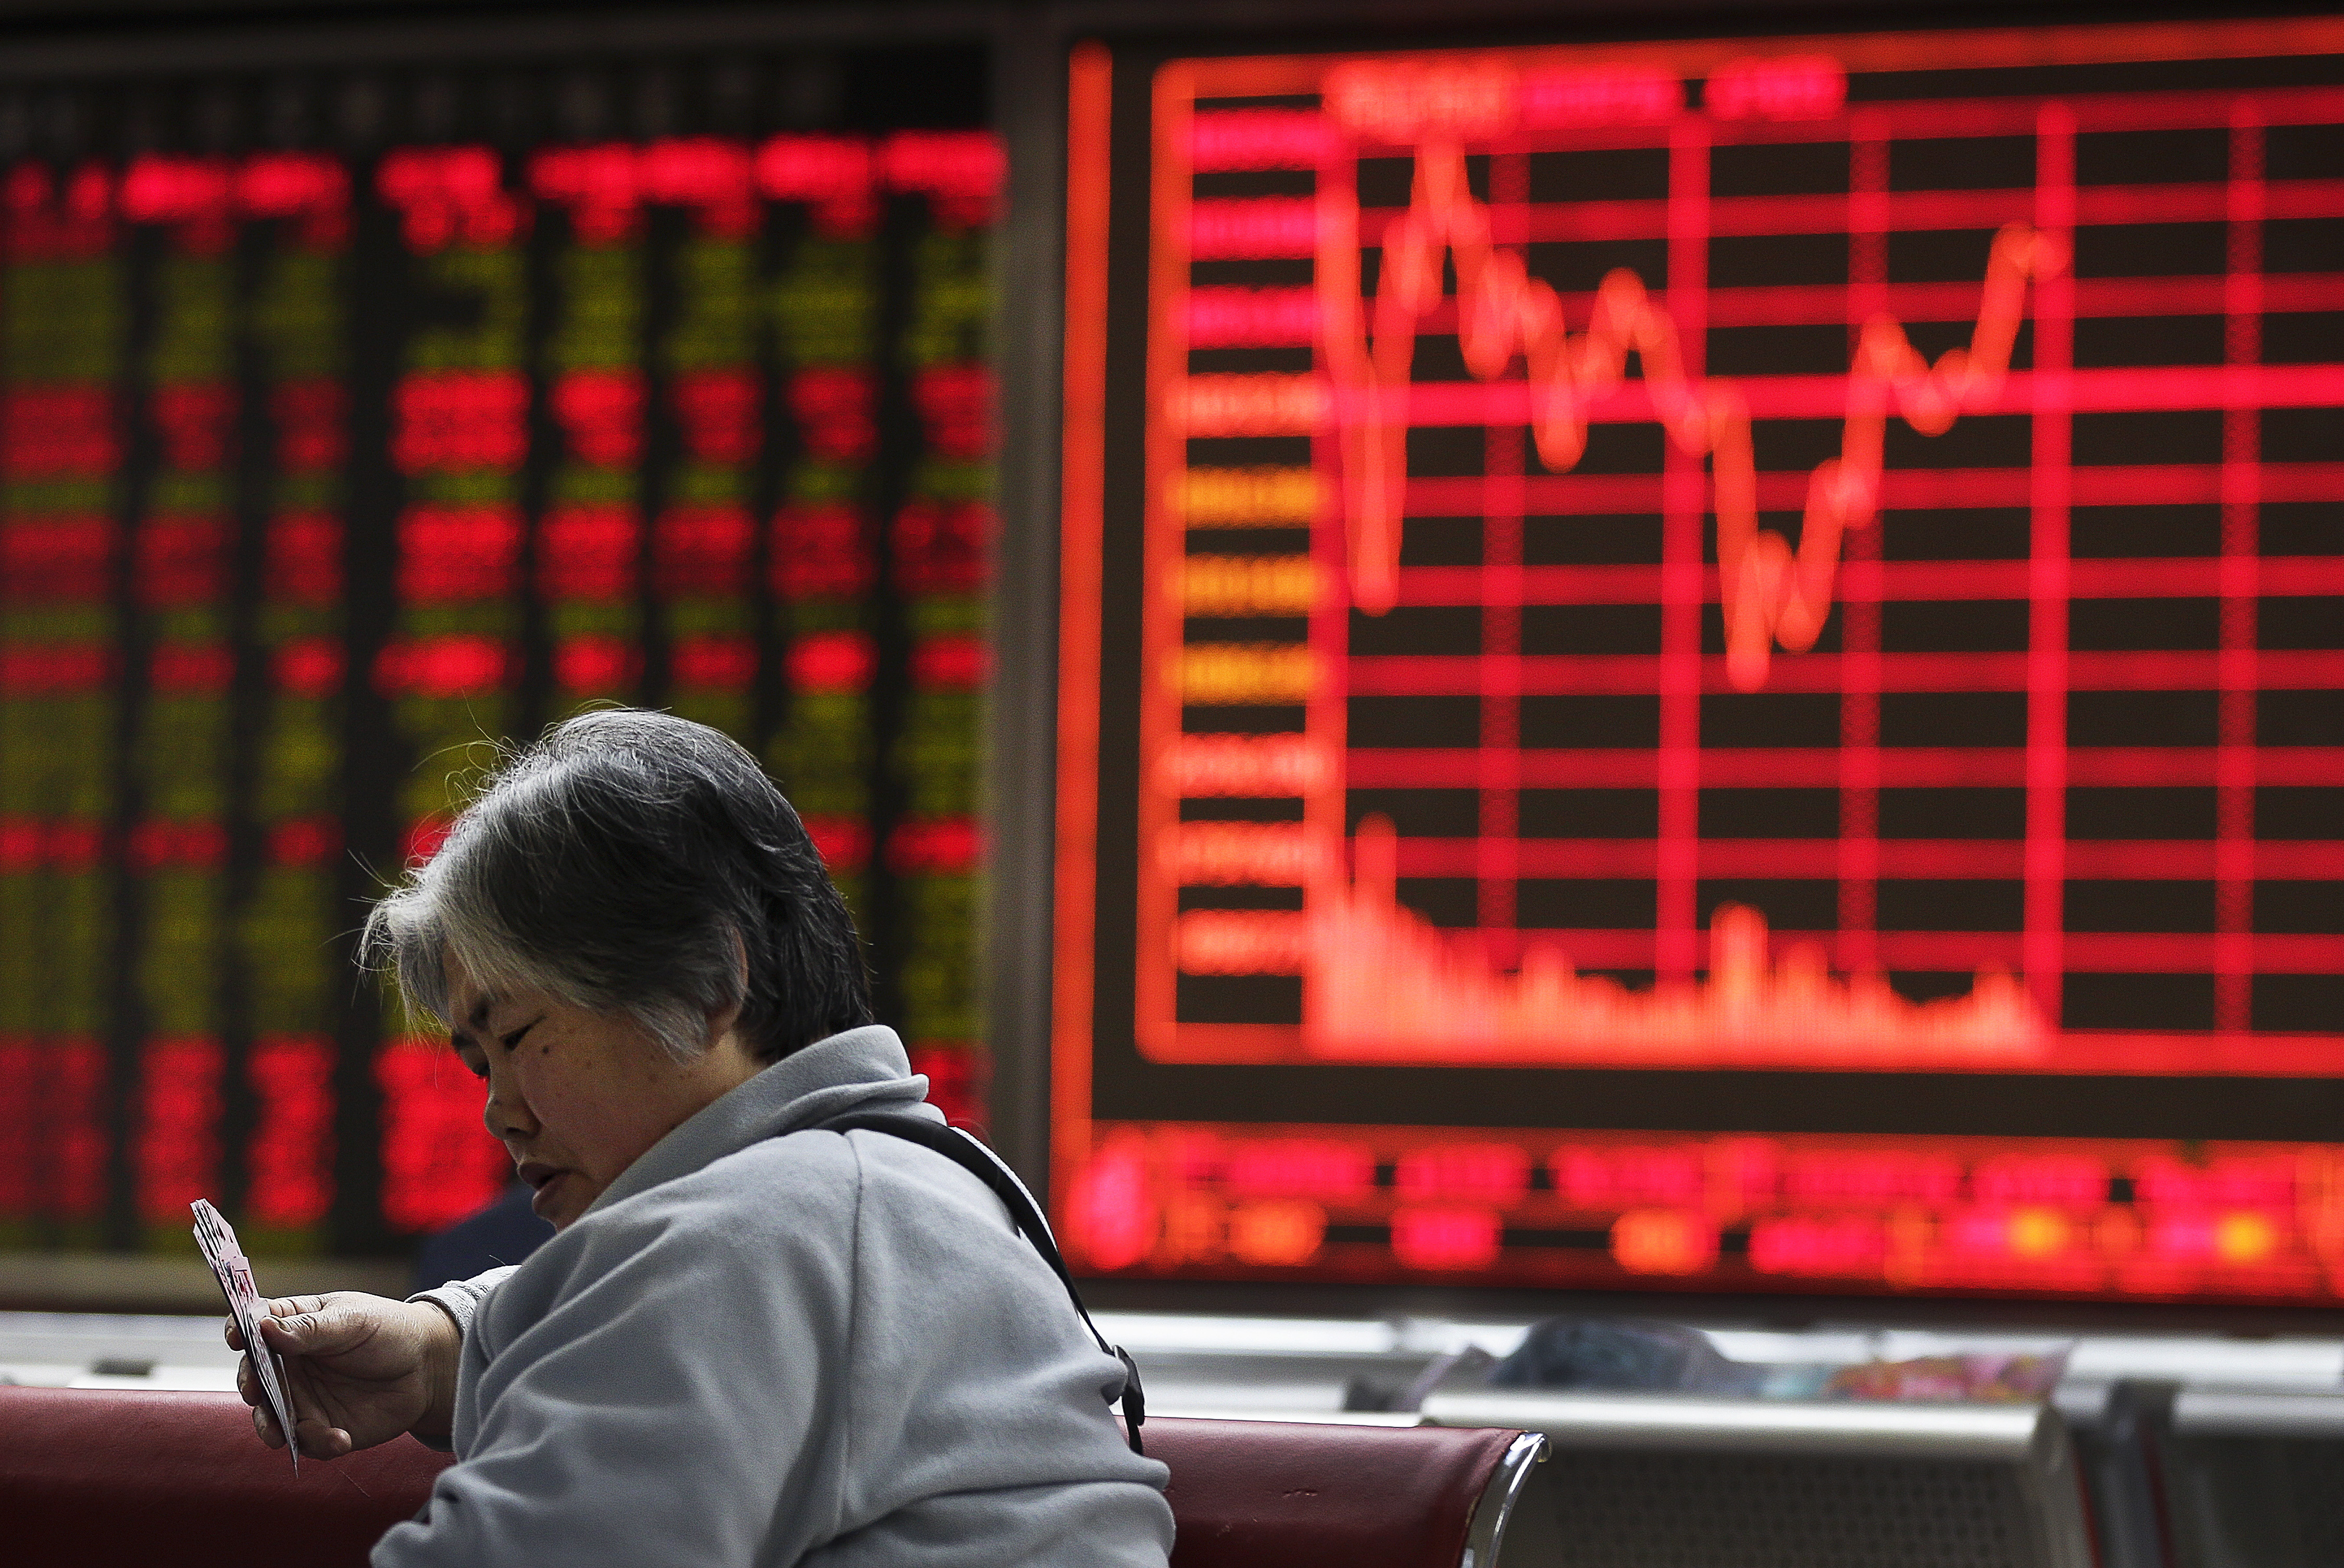 A woman plays cards with other investors at a brokerage house in Beijing, Tuesday, Jan. 12, 2016. Chinese stocks seesawed Tuesday as worries lingered over the country's financial markets and economic outlook, fueling volatility in other Asian benchmarks. (AP Photo/Andy Wong)